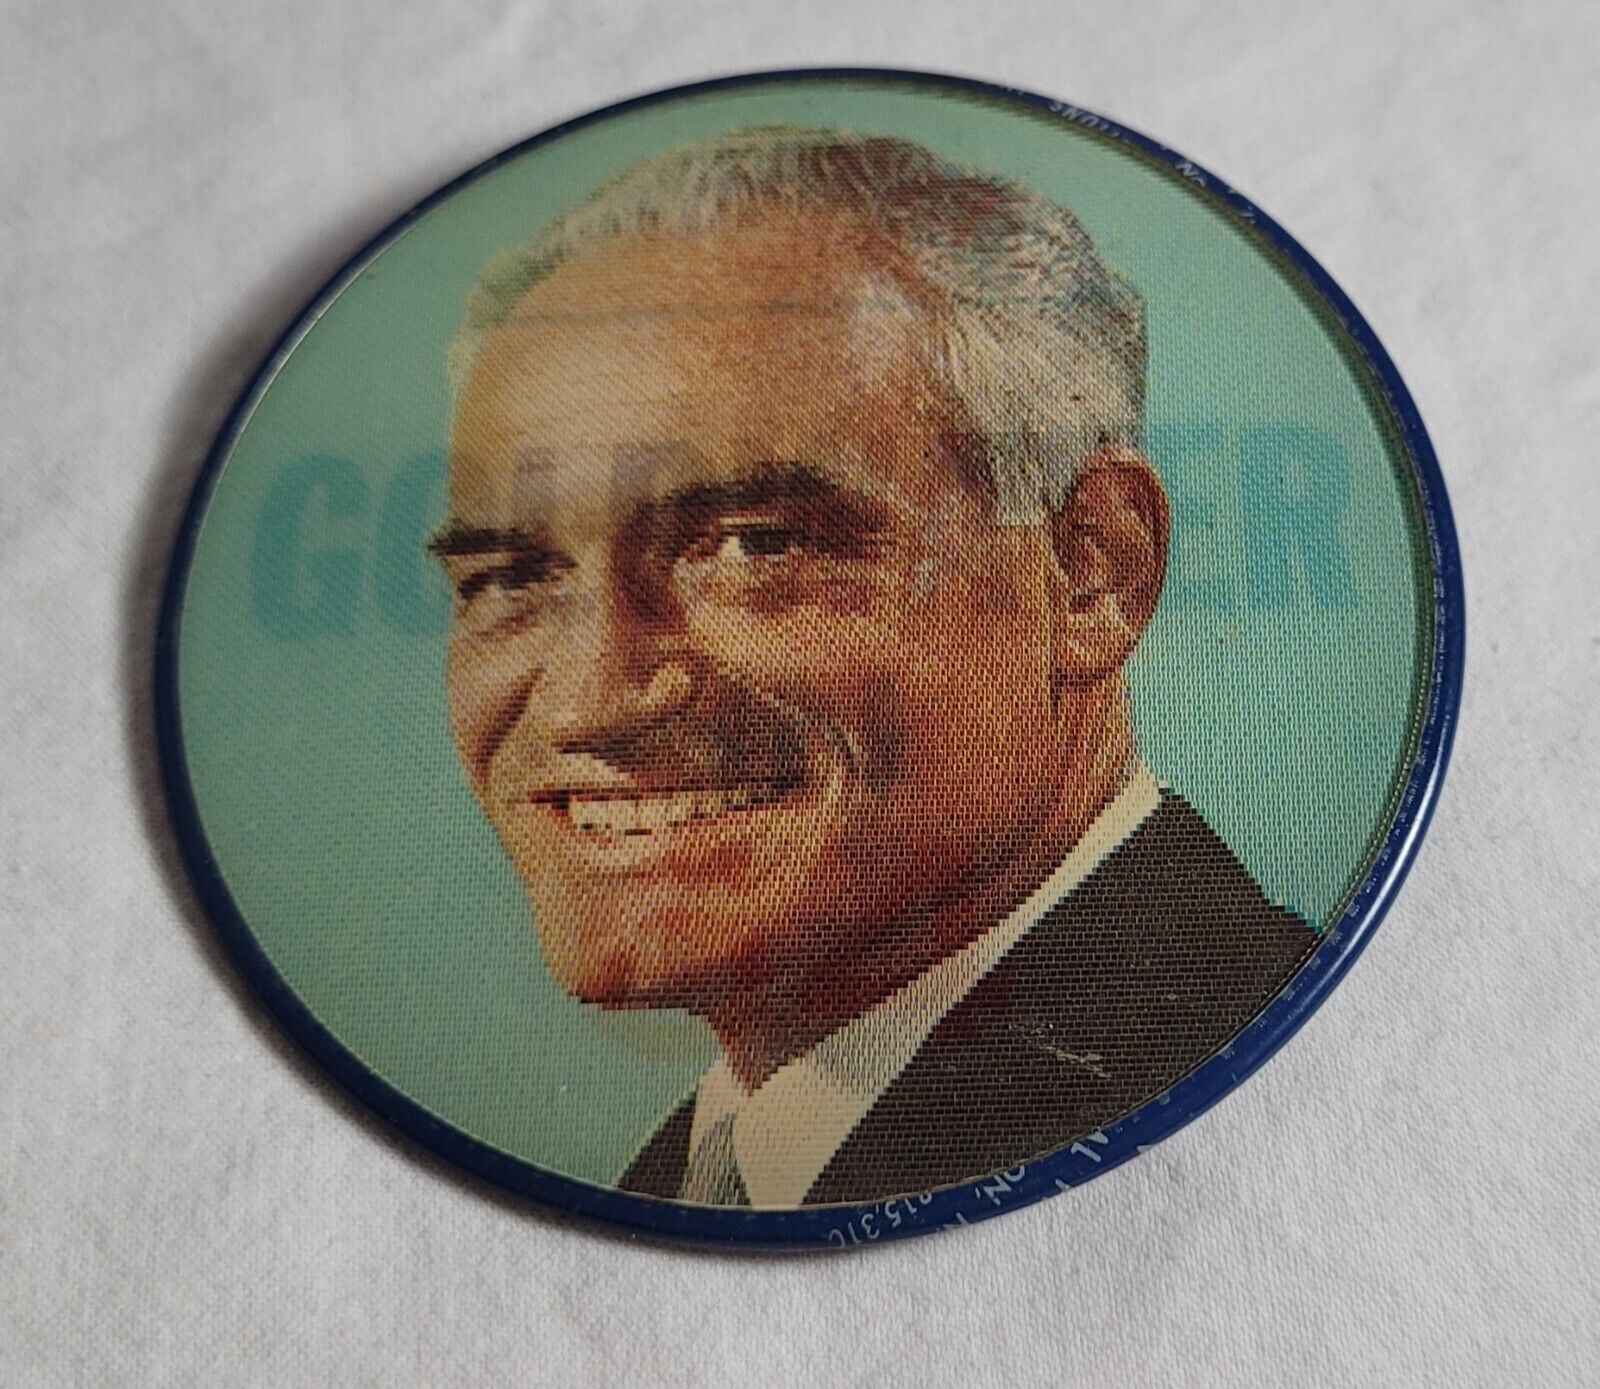 Barry Goldwater 1964 Flasher Political Pin 1964 Presidential Campaign